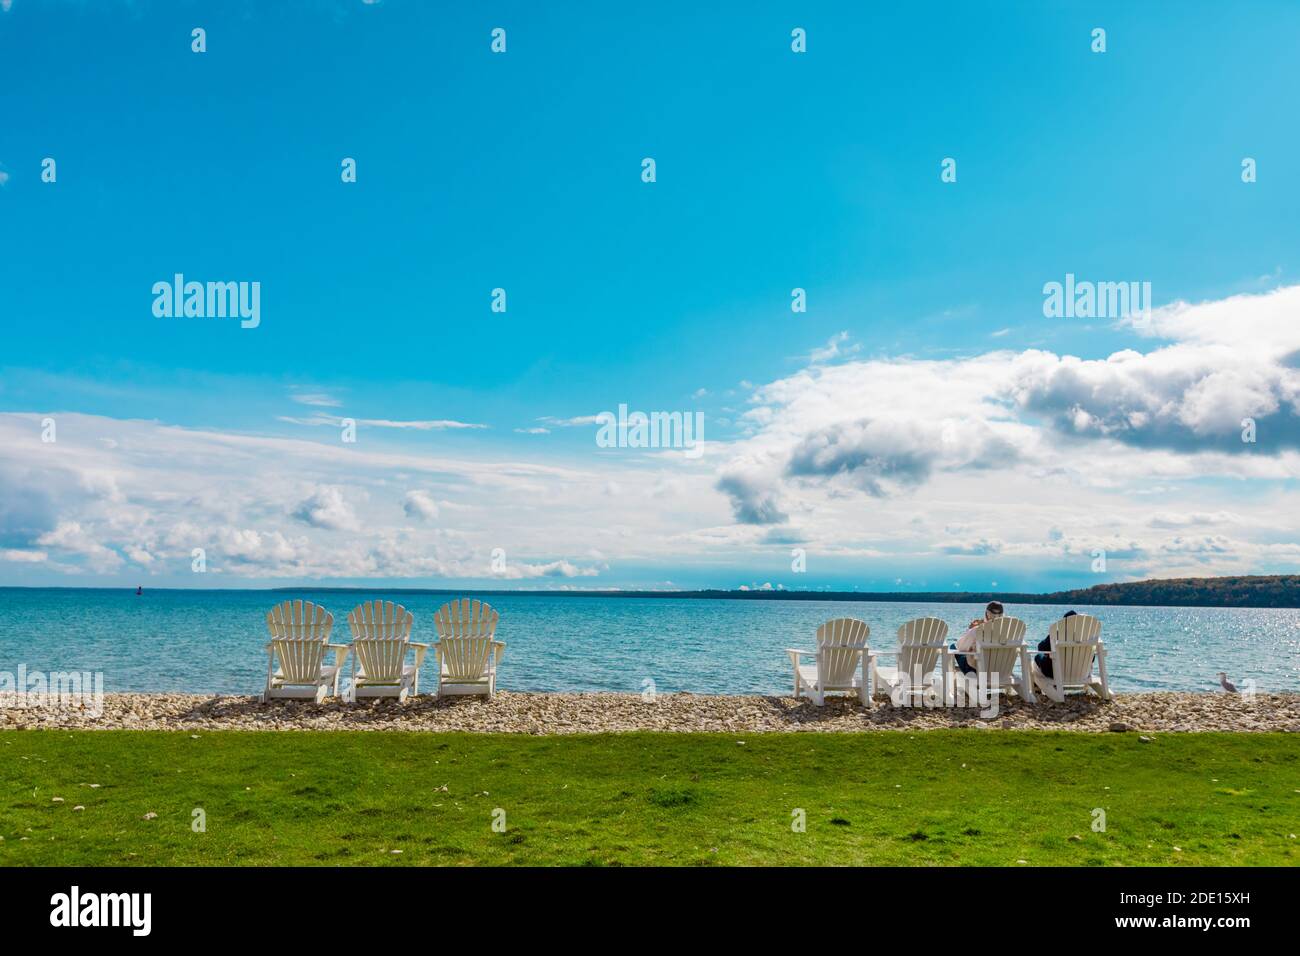 Crystal clear waters and pebbled beaches, Mackinac Island, Michigan, United States of America, North America Stock Photo